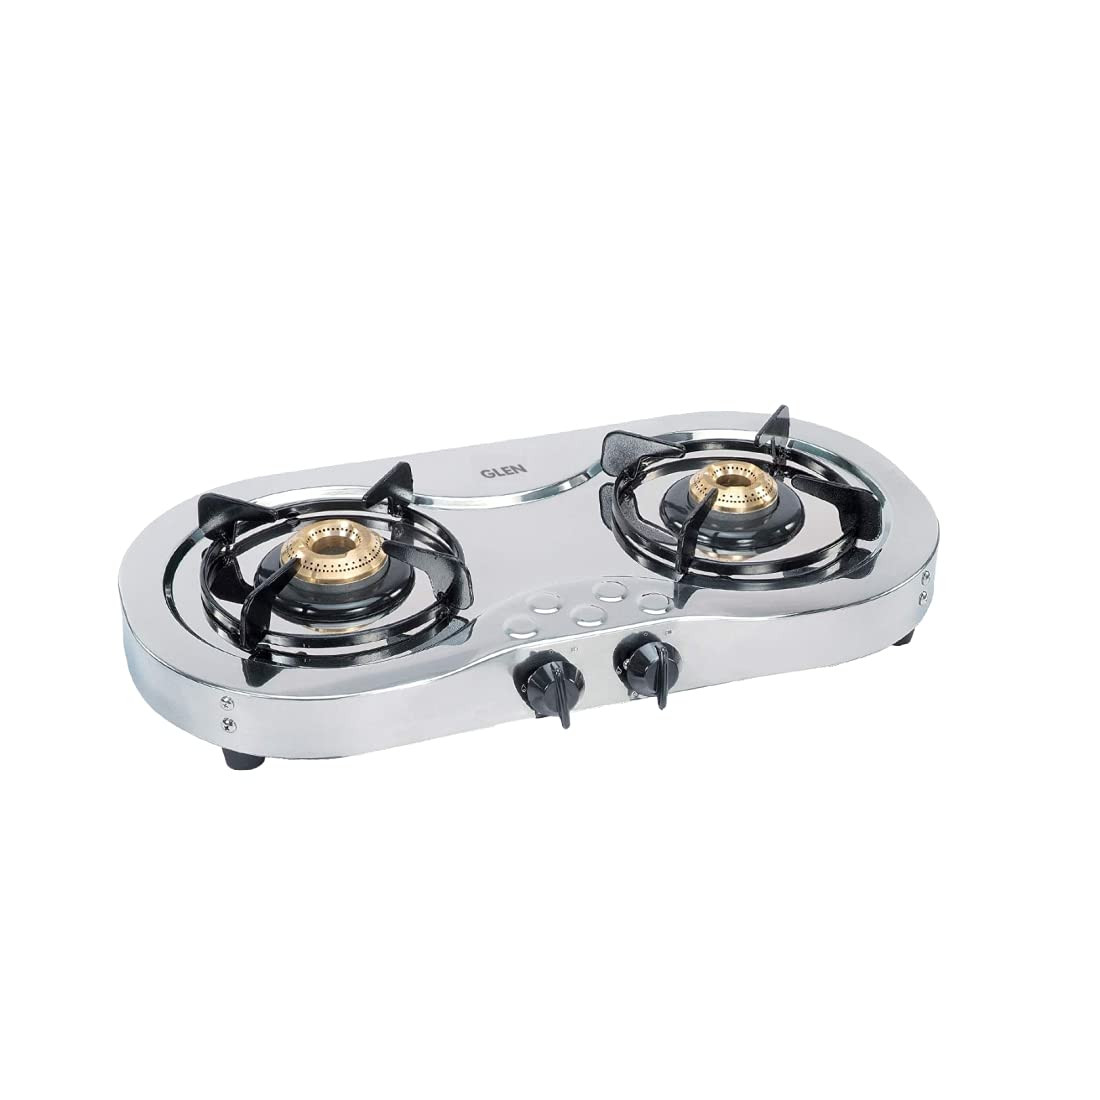 Glen Cooktops CT 1026 SS BB AI-2 Burner Stainless Steel Gas Stove with Brass Burner, Sliver -Trade Nepal